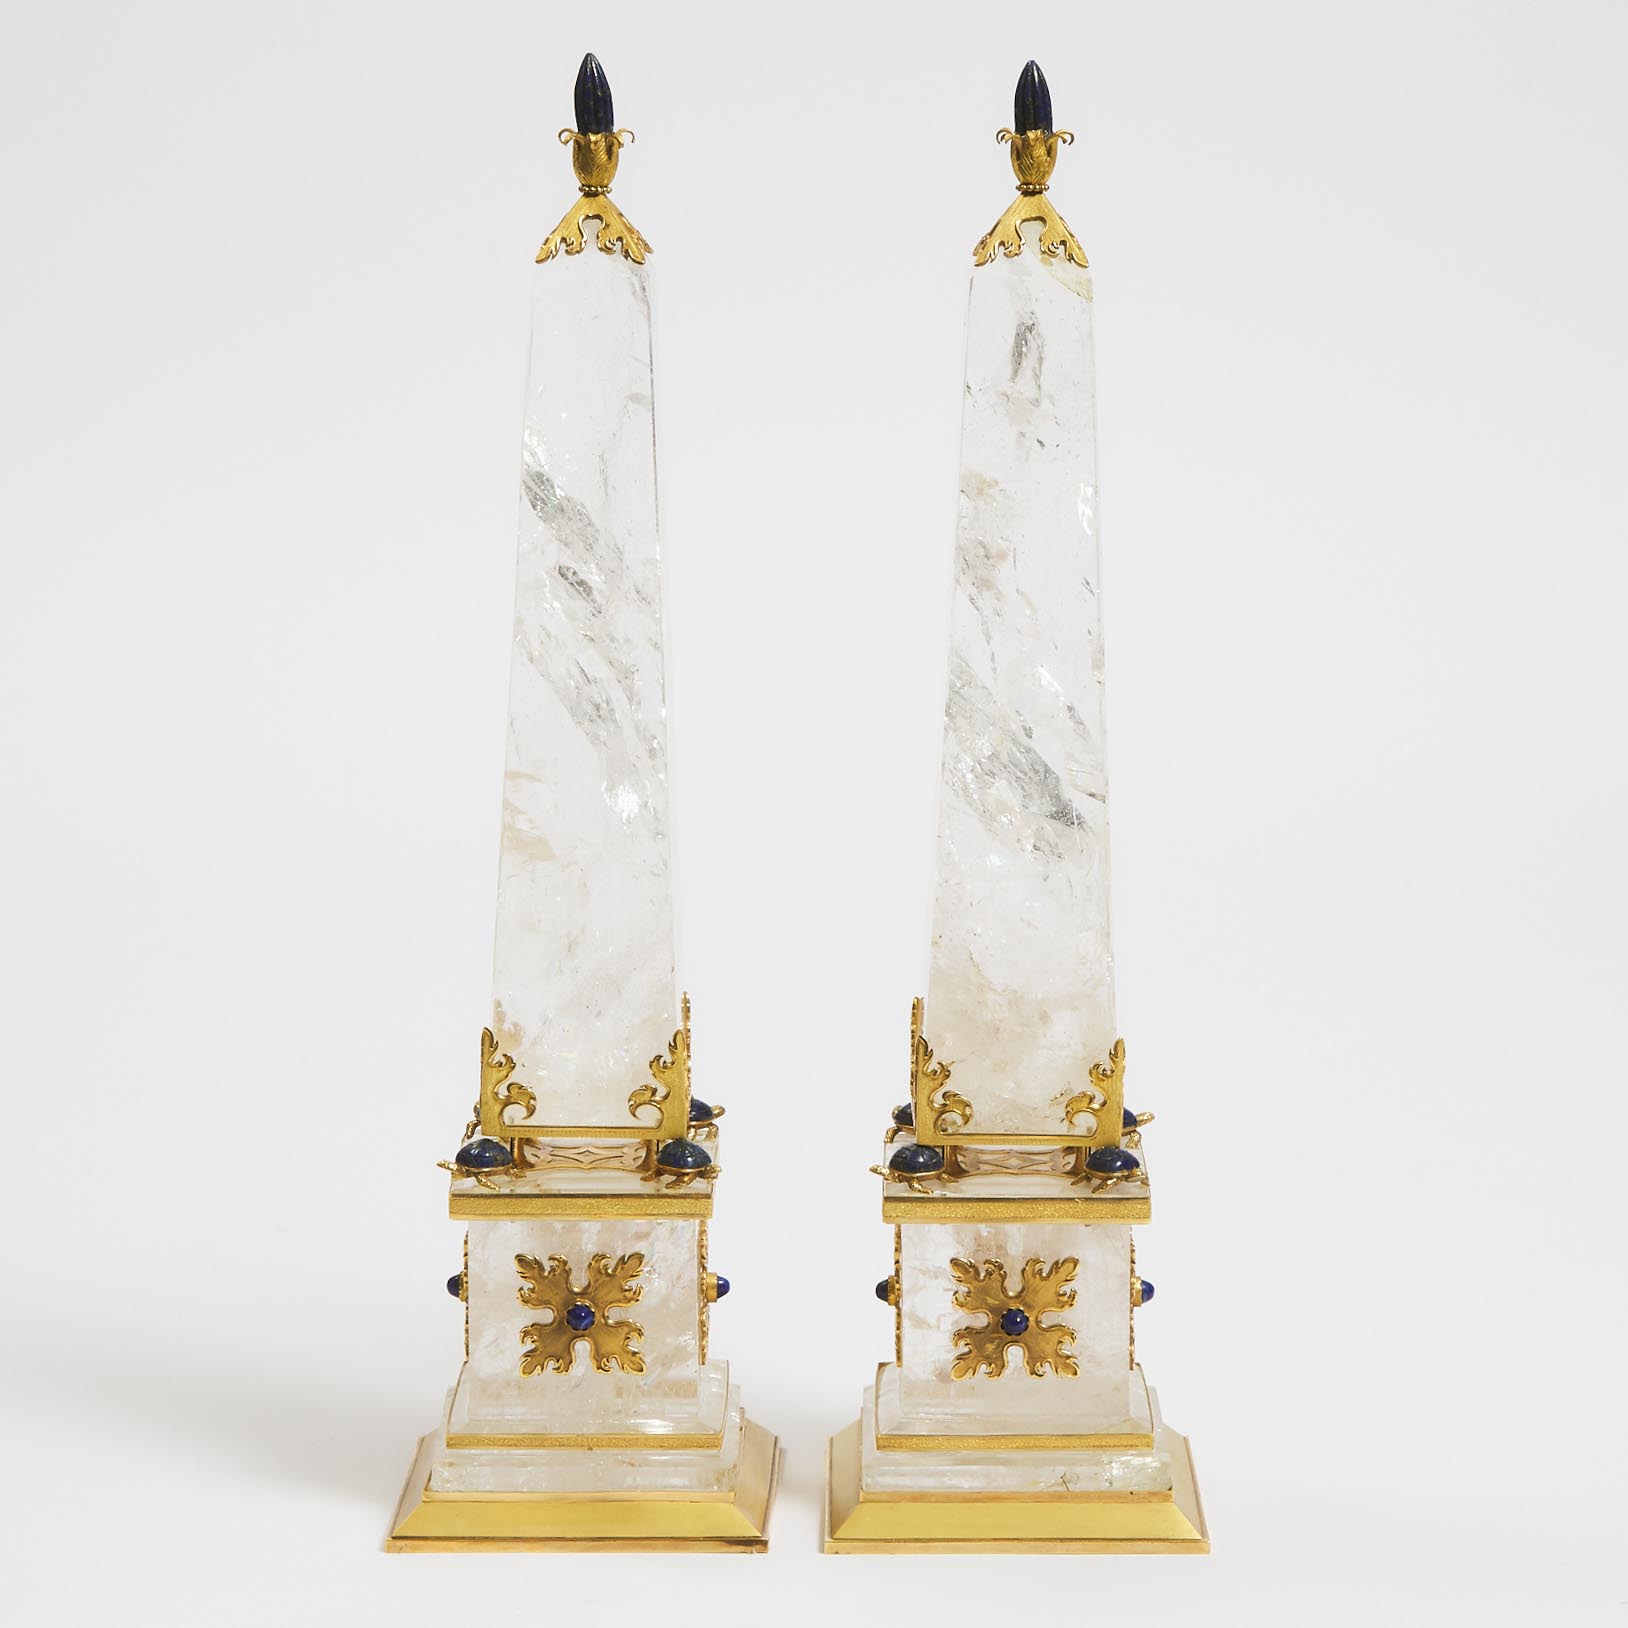 Pair of French Silver Gilt and Sodalite Mounted Obelisks, 20th century